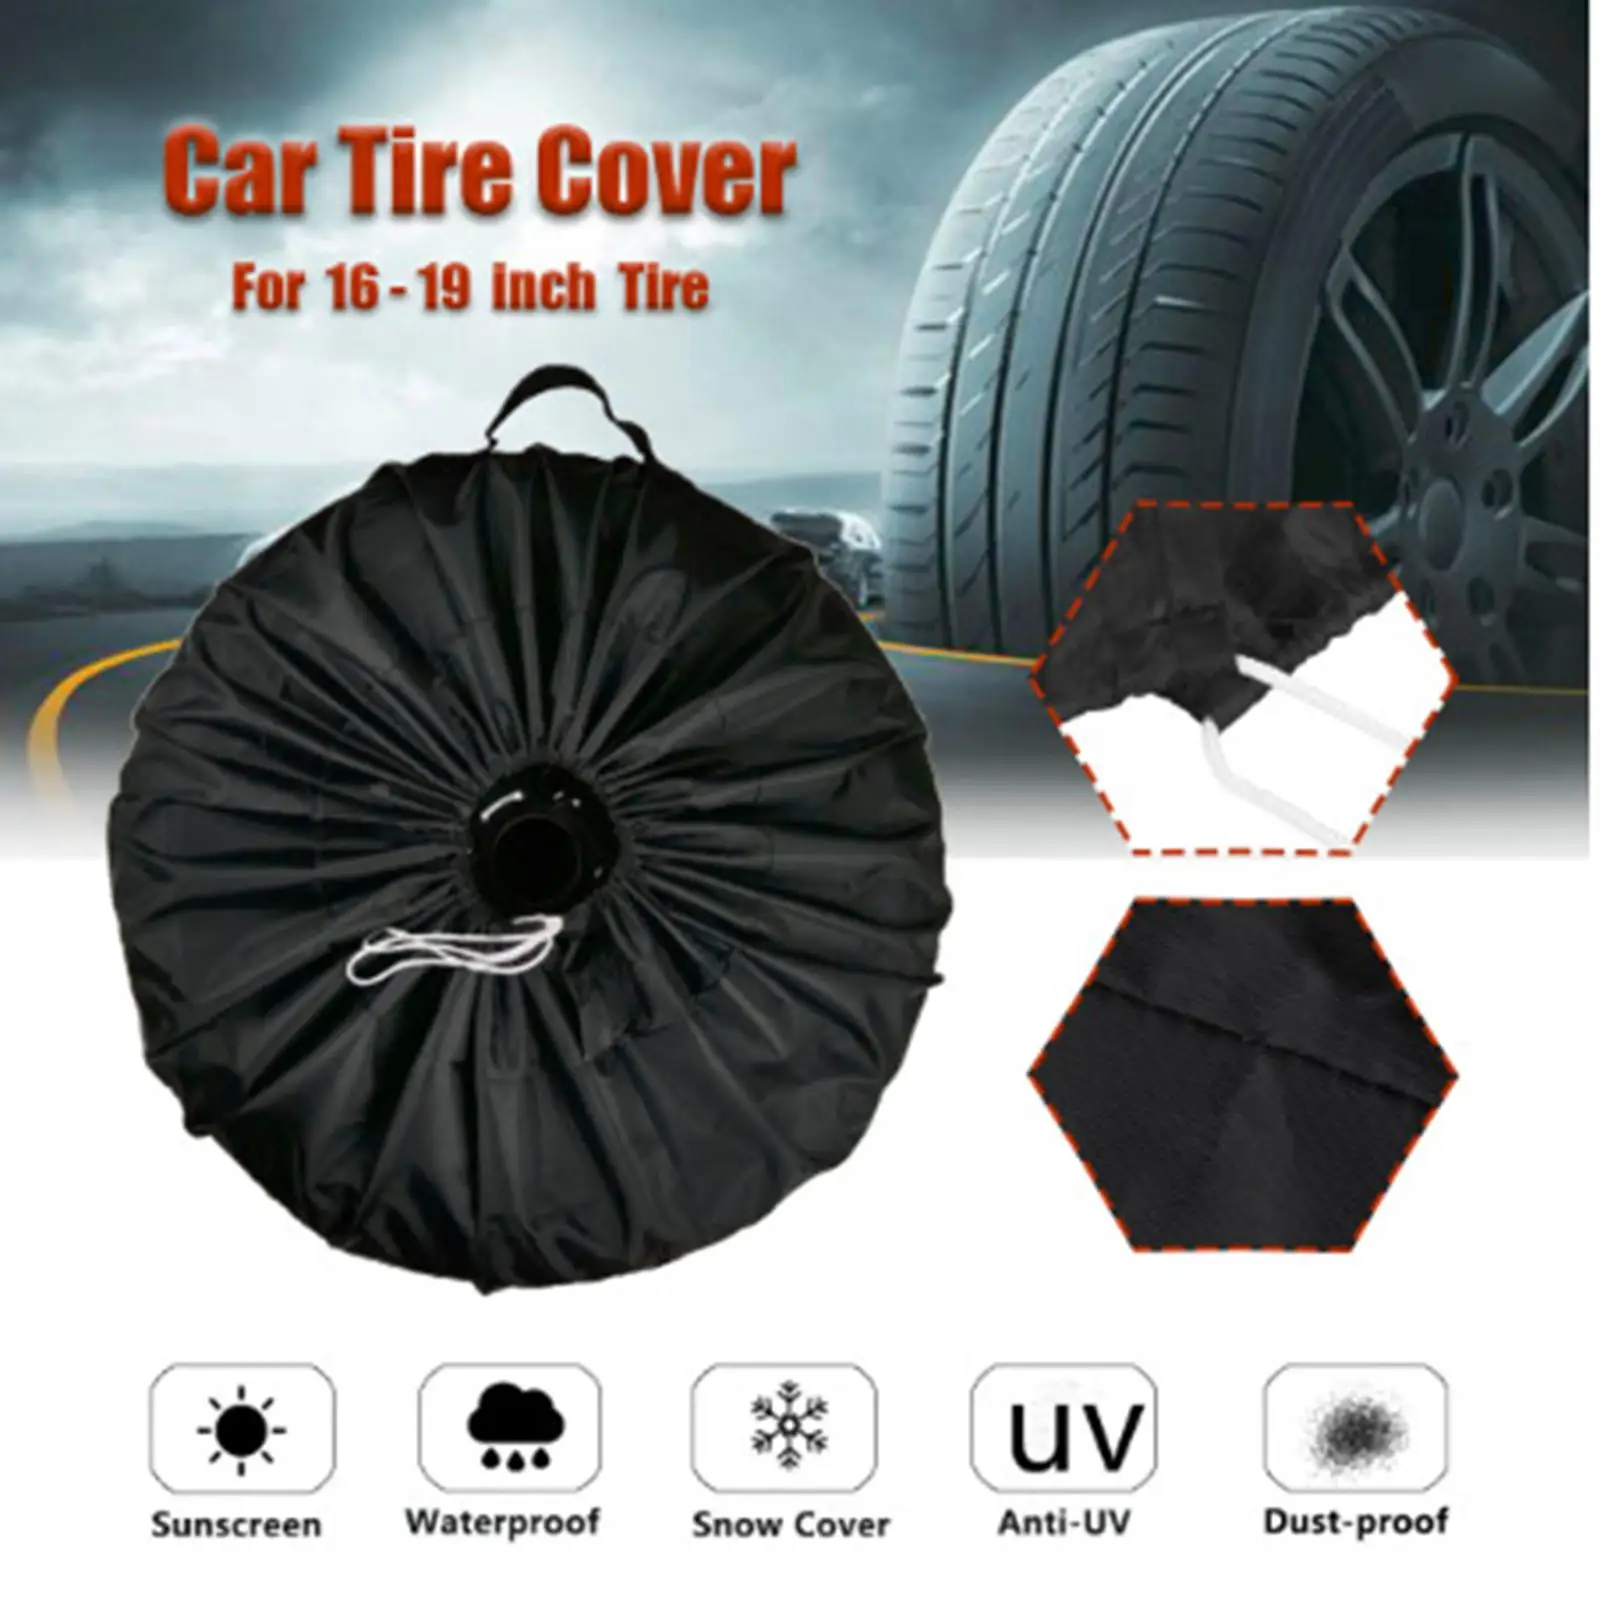 1 Package Tyre Cover Camper 210D Universal Fit Protective Oxford Fabric Diameters Entire Overall Bag for Truck SUV Jeep Car